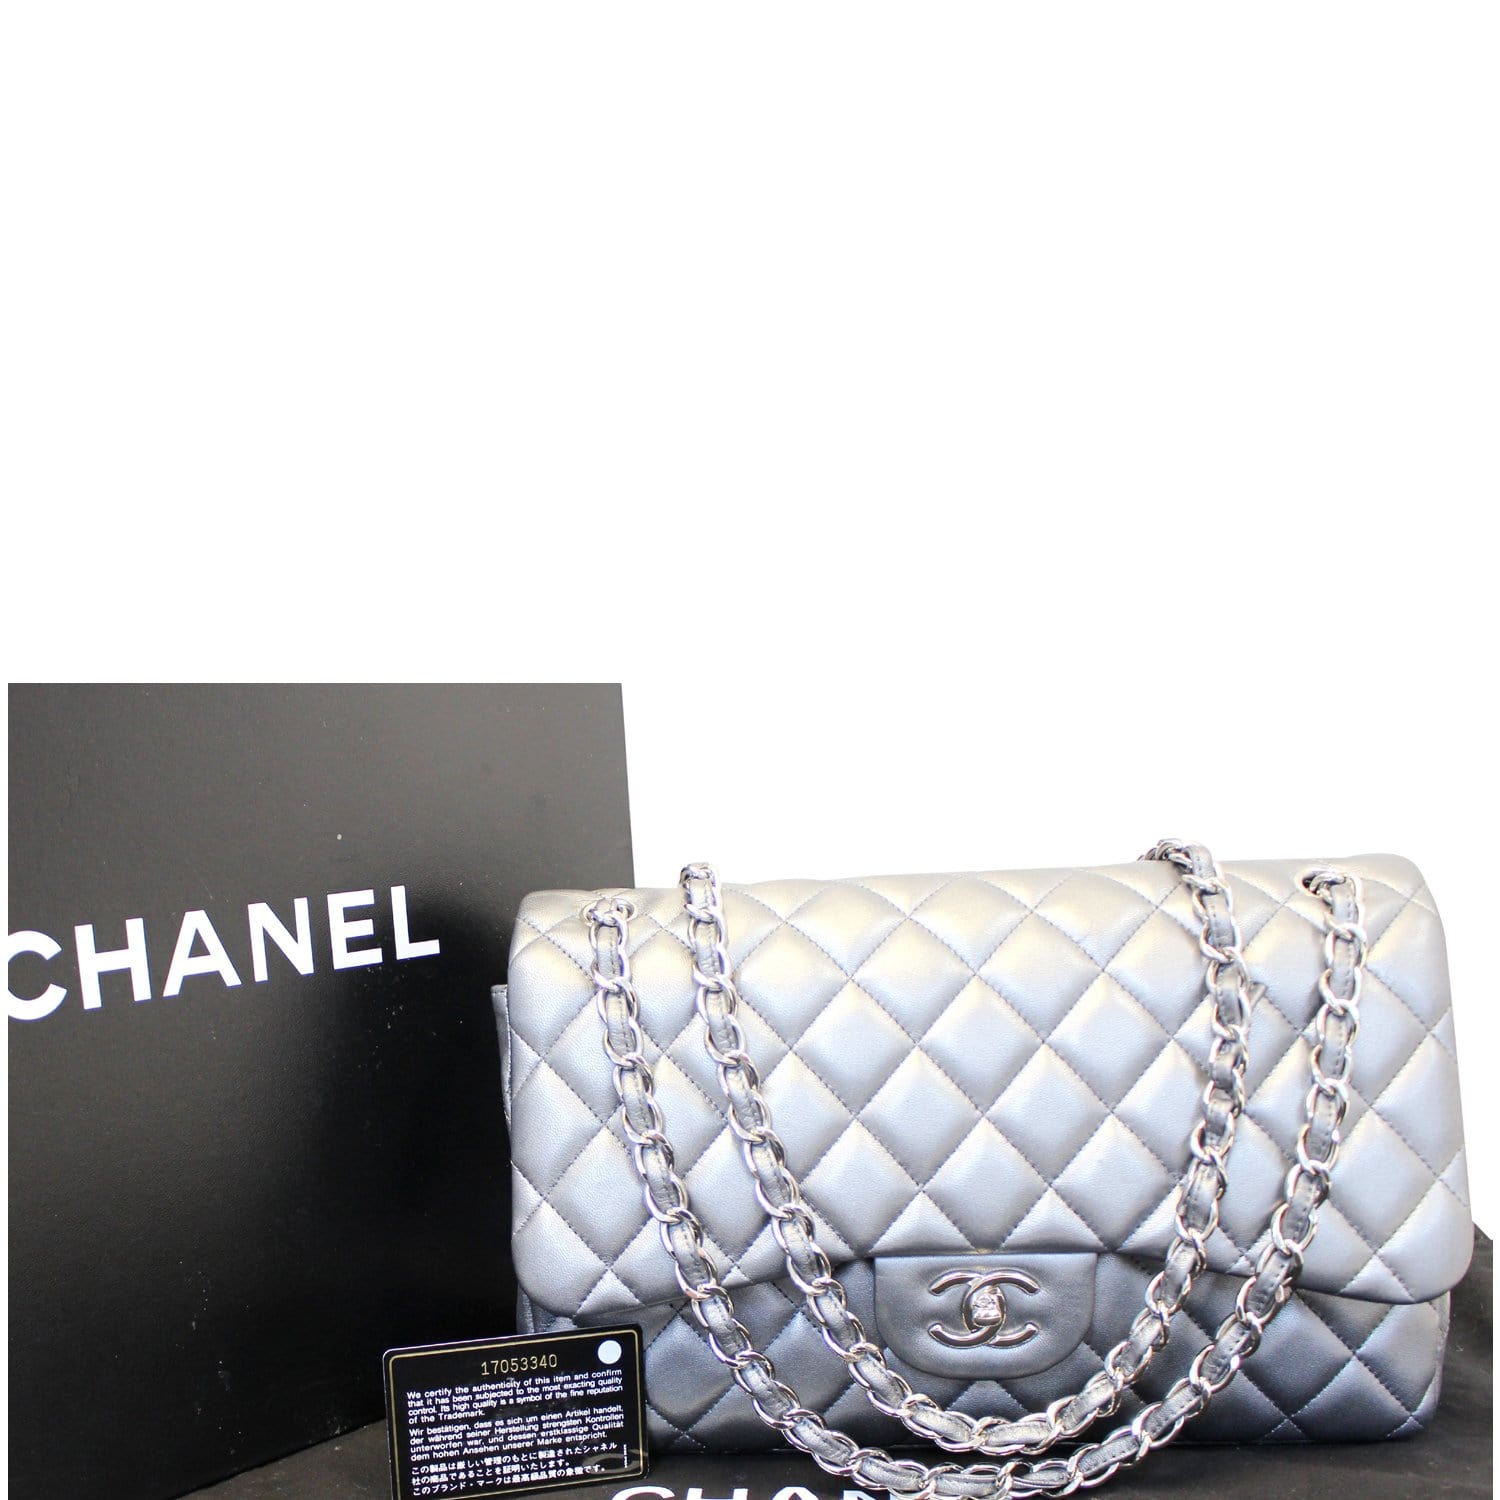 CHANEL Maxi Quilted Leather Double Flap Silver Shoulder Bag-US